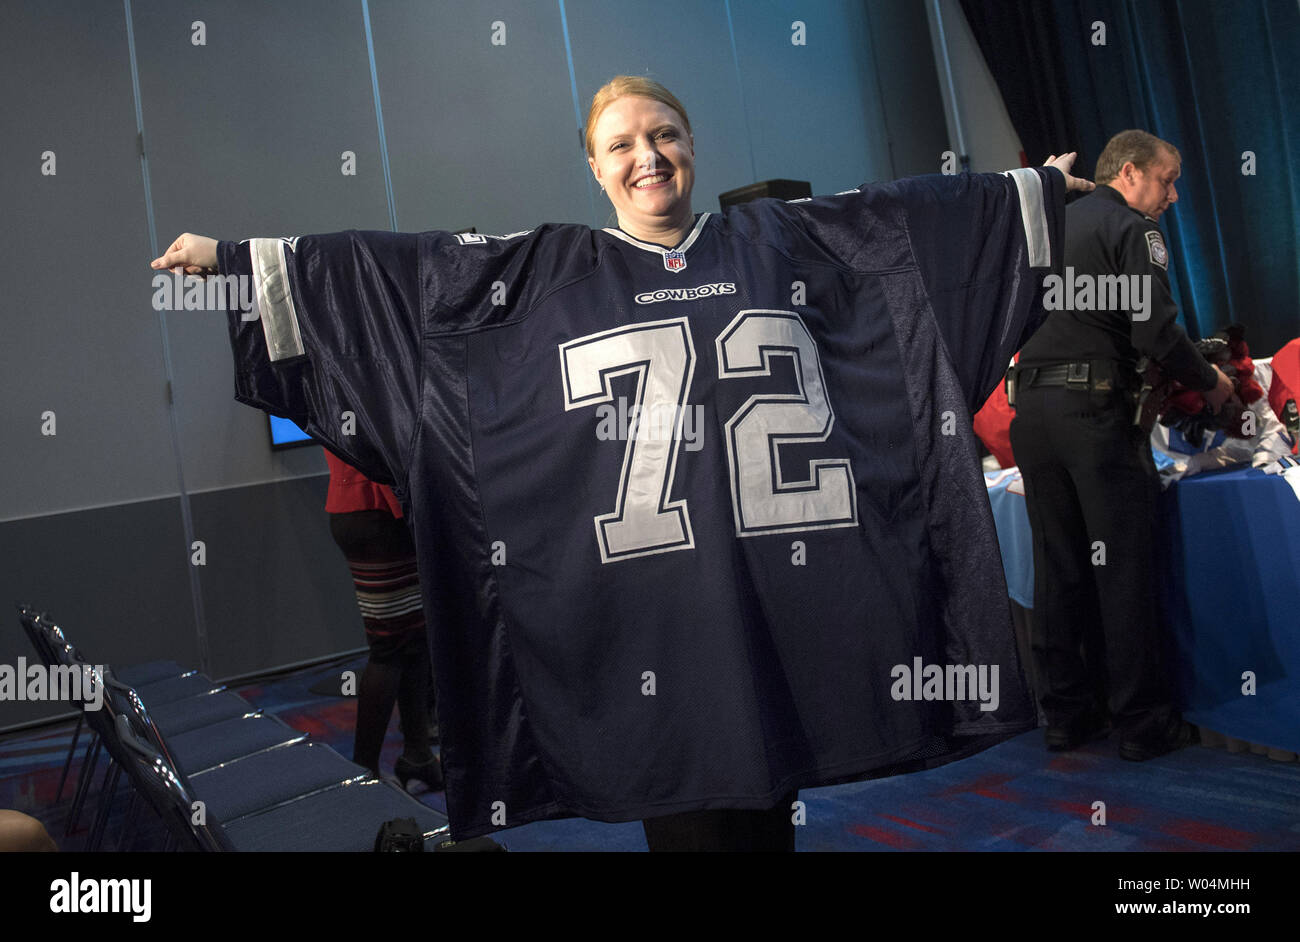 A woman wears a counterfeit 10XL Cowboys jersey at a press conference on  NFL counterfeit merchandise and tickets, in Houston, Texas on February 2,  2017. Officials with the NFL, Department of Homeland